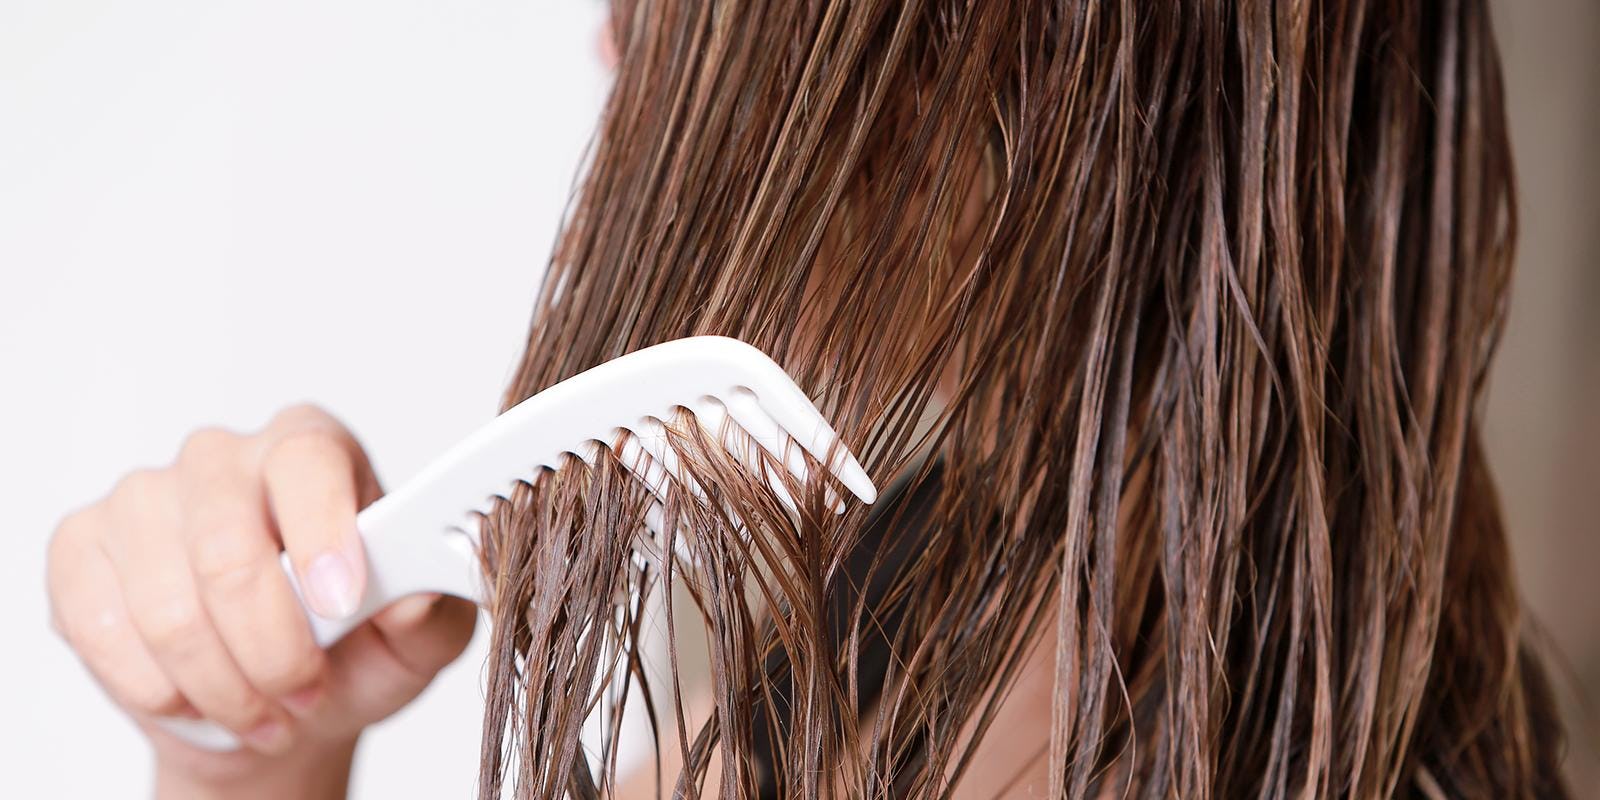 7 hair styling mistakes